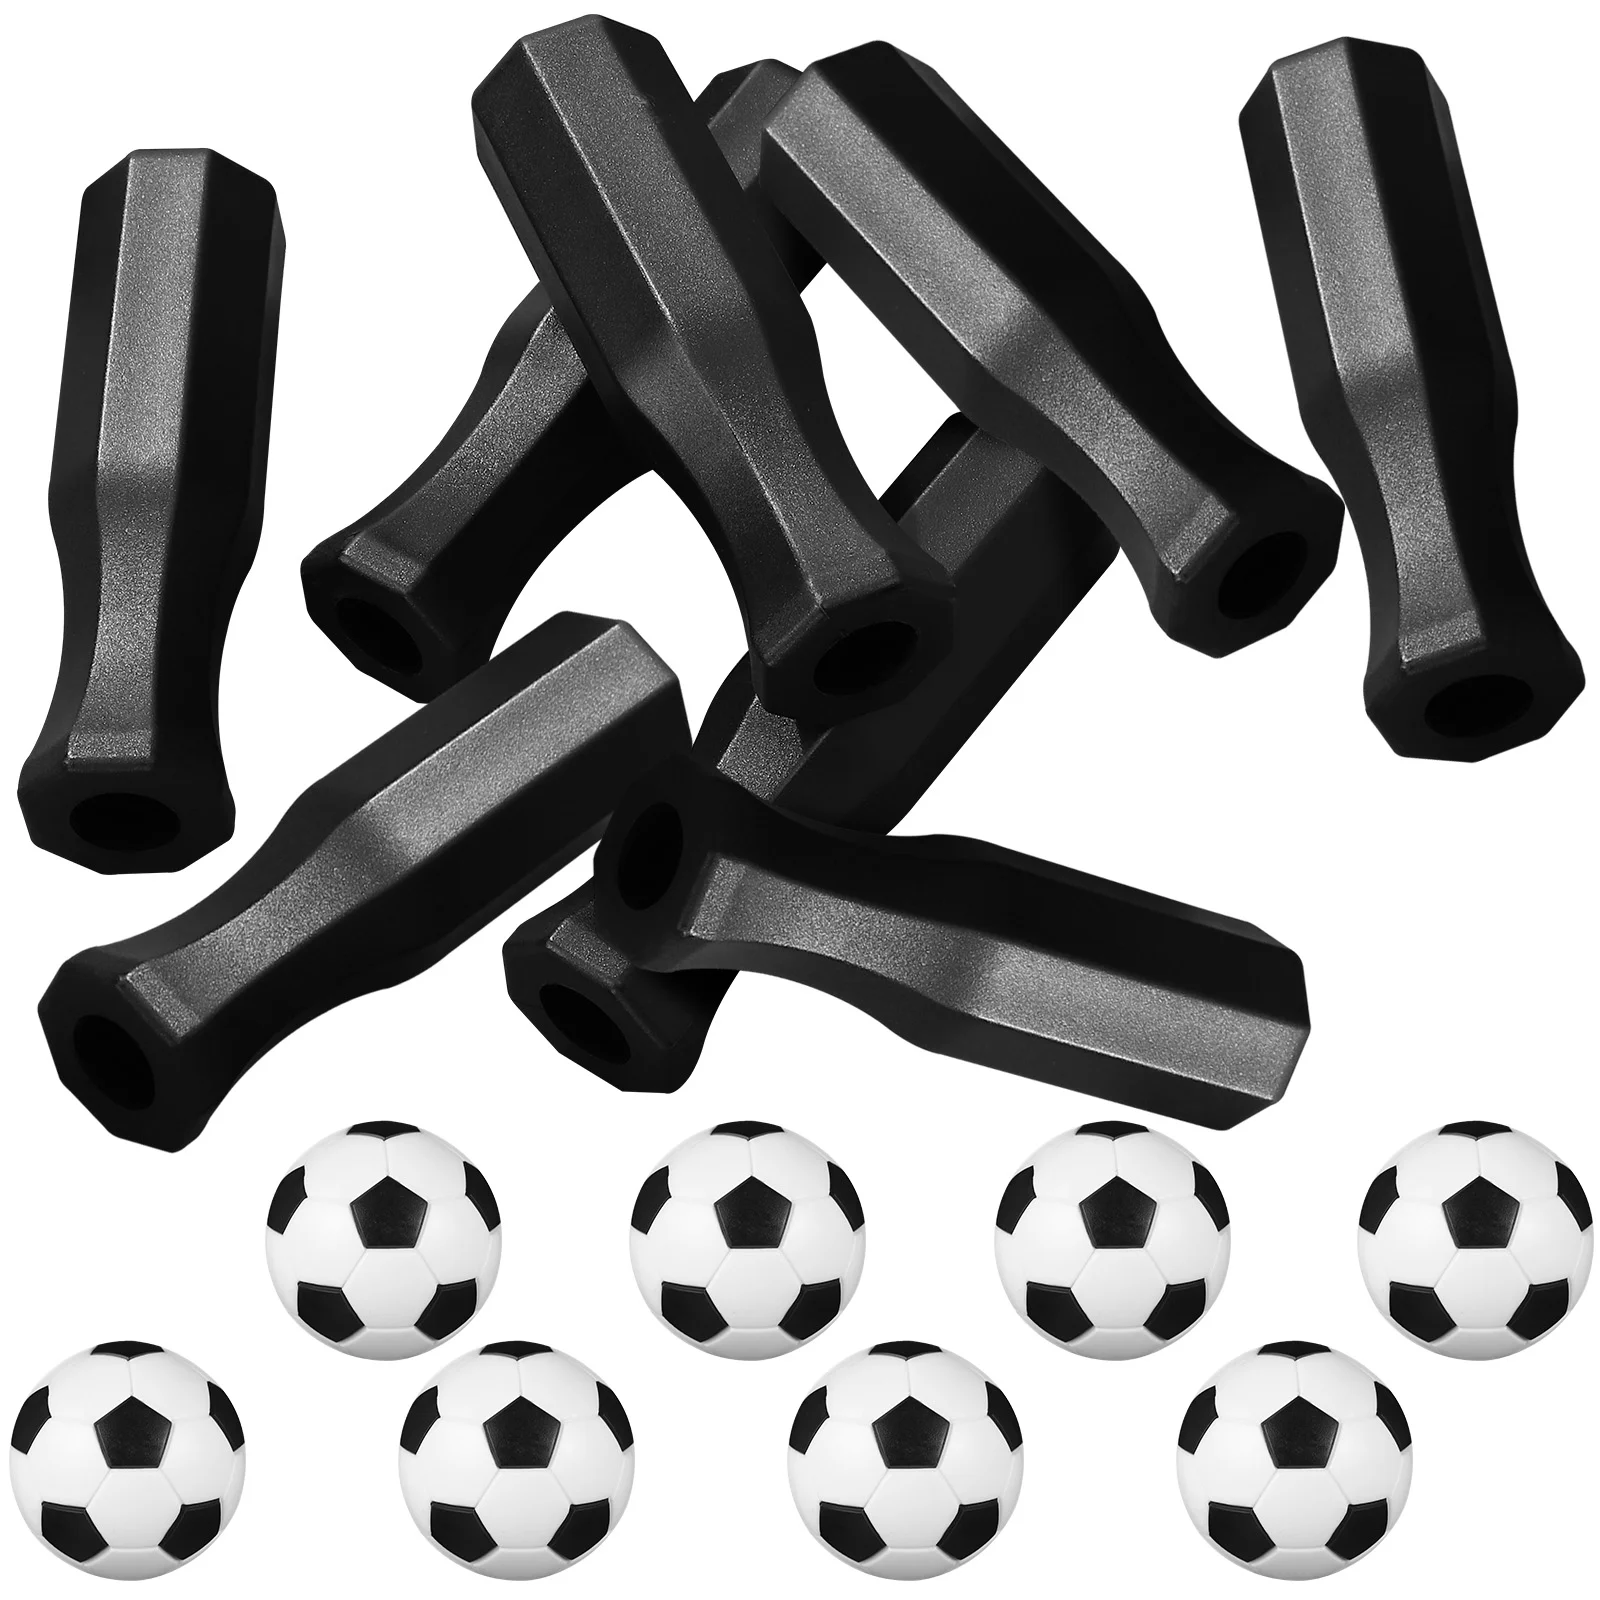 

Foosball Table Soccer Handle Grip Footballgame Accessories Replacement Replacements Mini Ballhandles Replaceable Ergonomic Grips